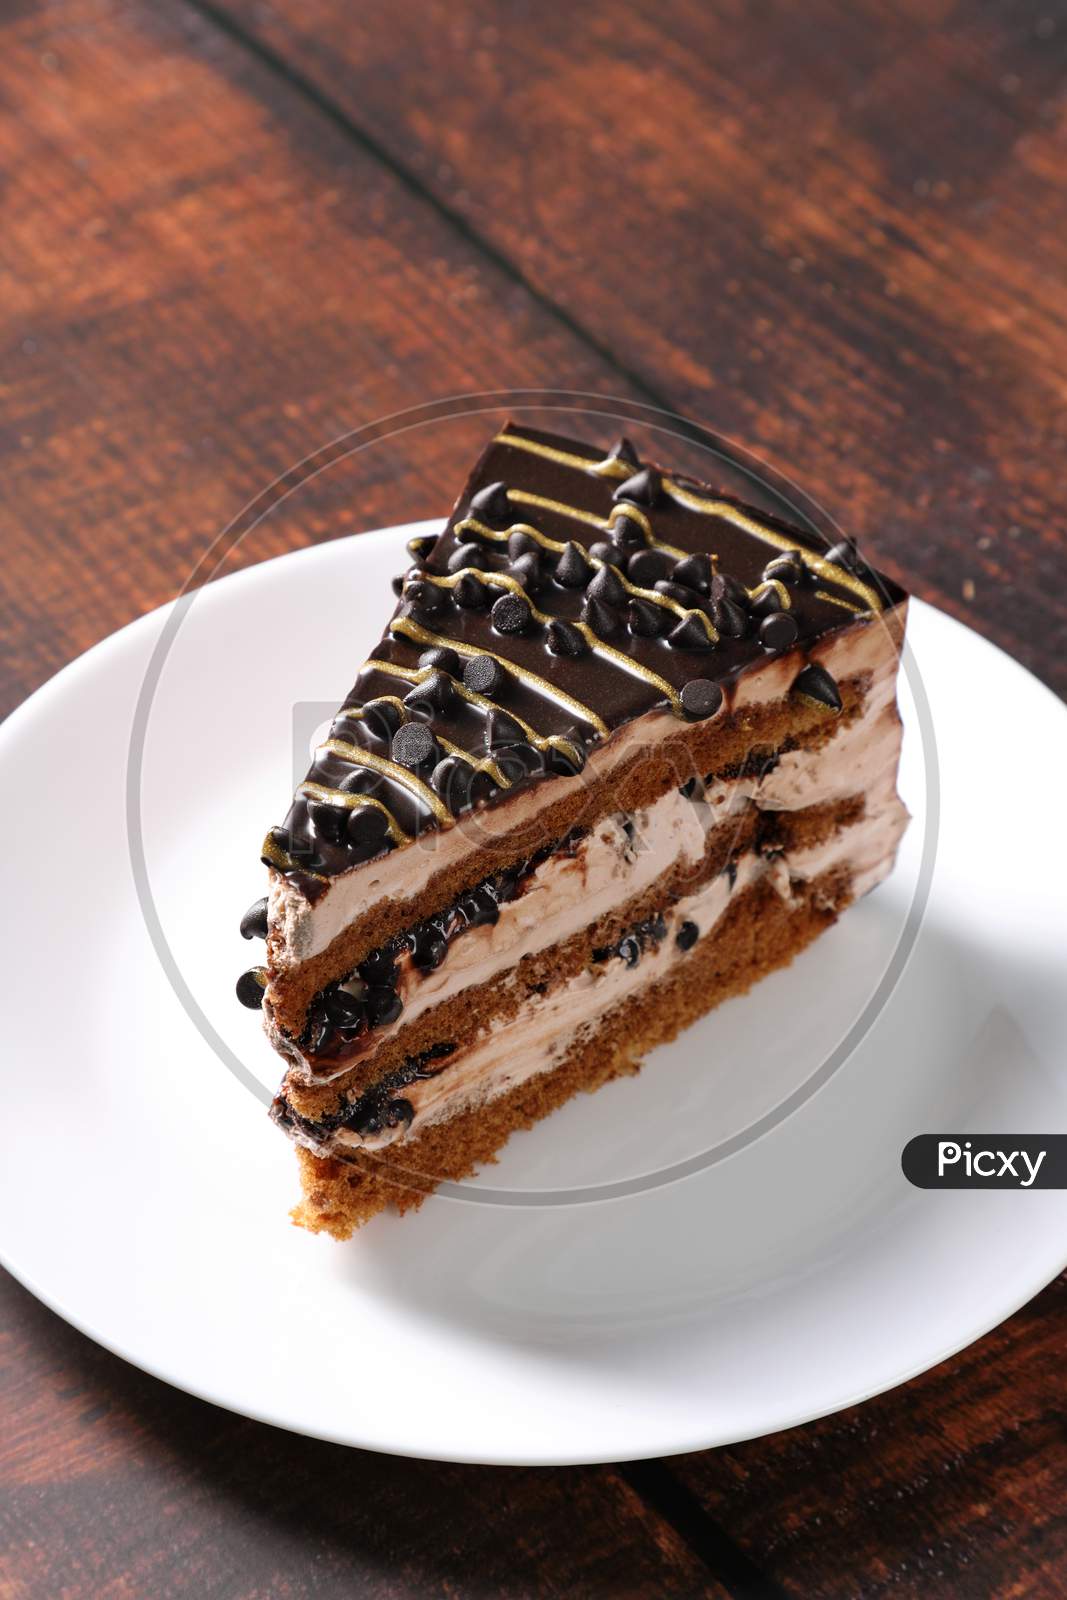 Dessert - A Sweet Cake Slice With Chocolate Chips And Cream